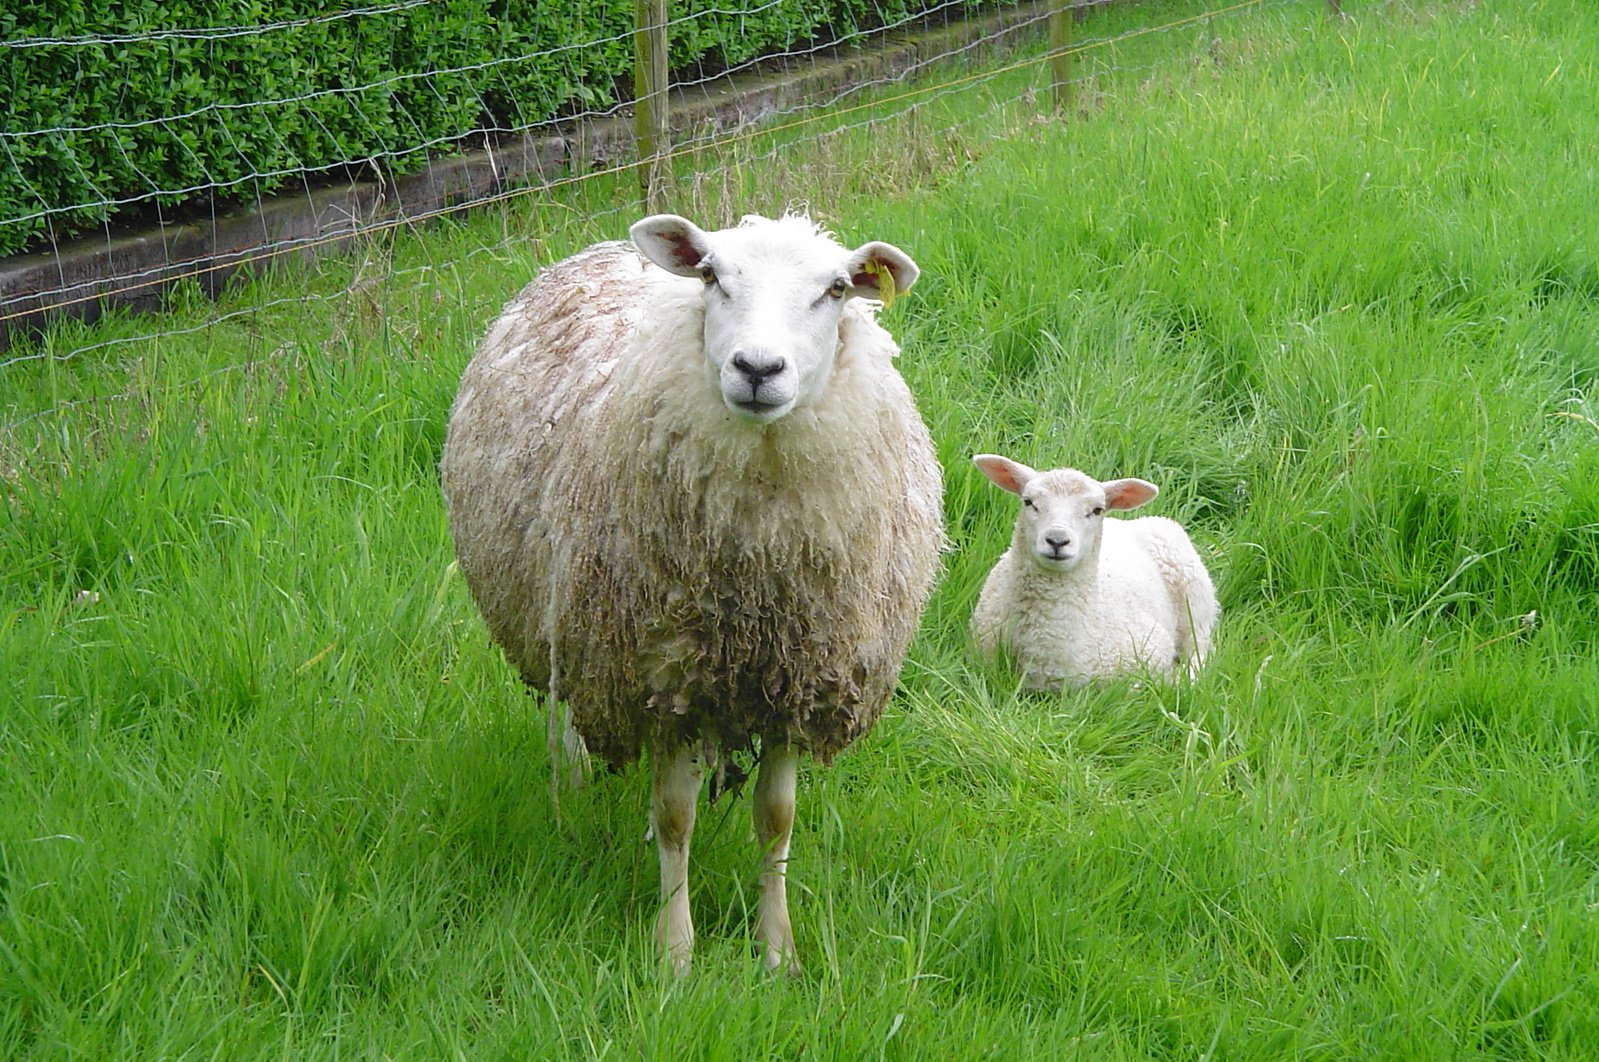 an adult sheep and two baby sheep in grassy field